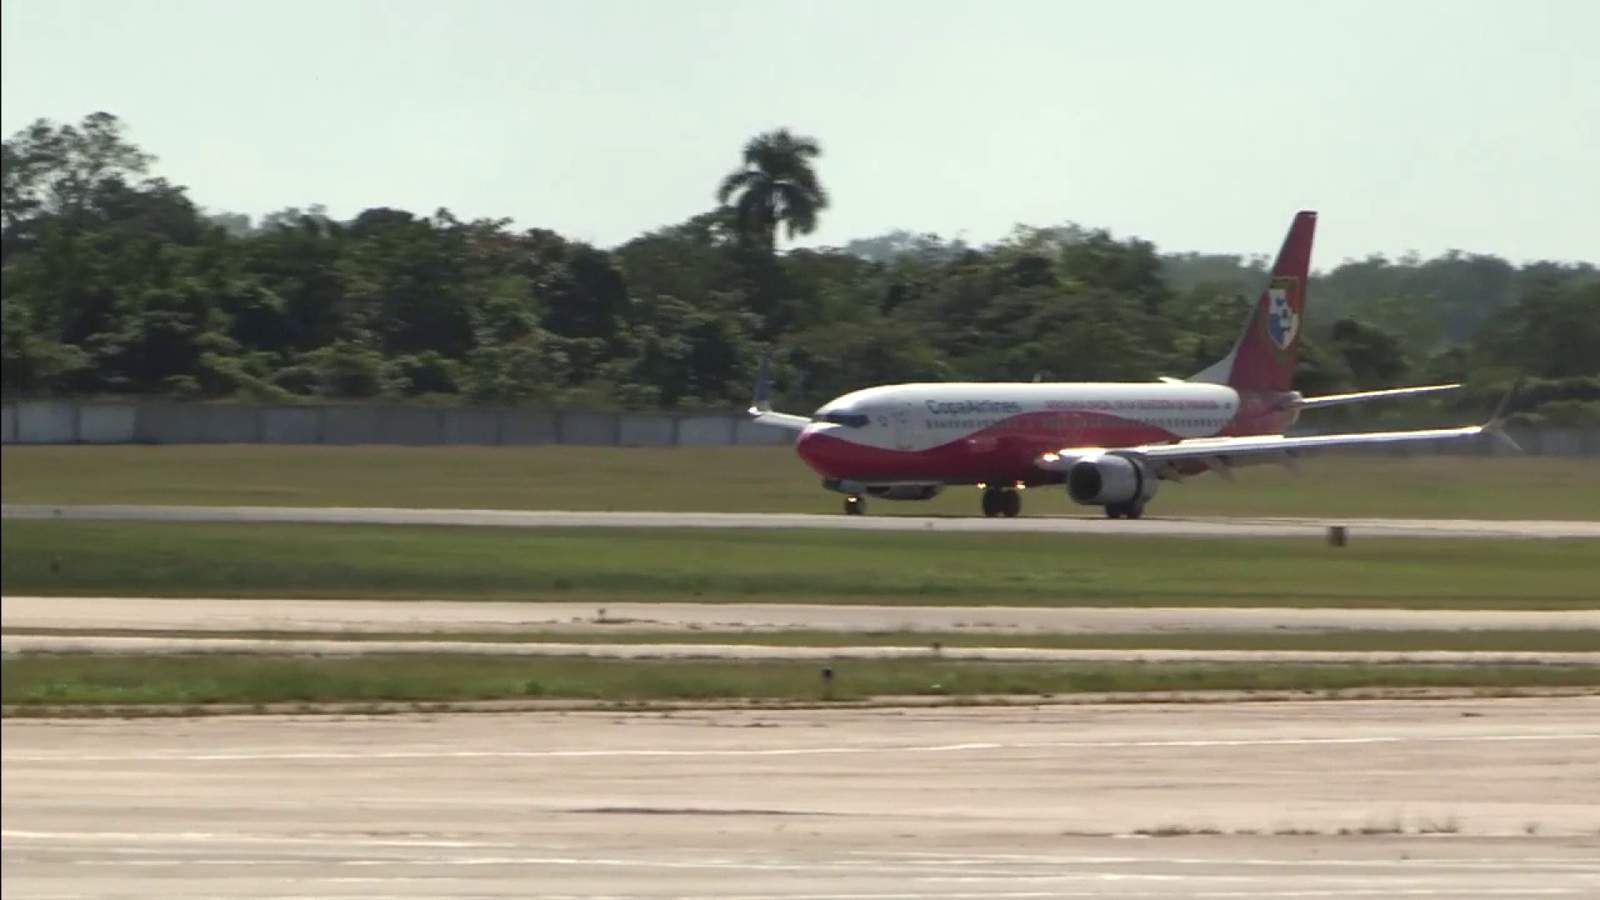 Havana opens international airport after 7-month closure over COVID-19